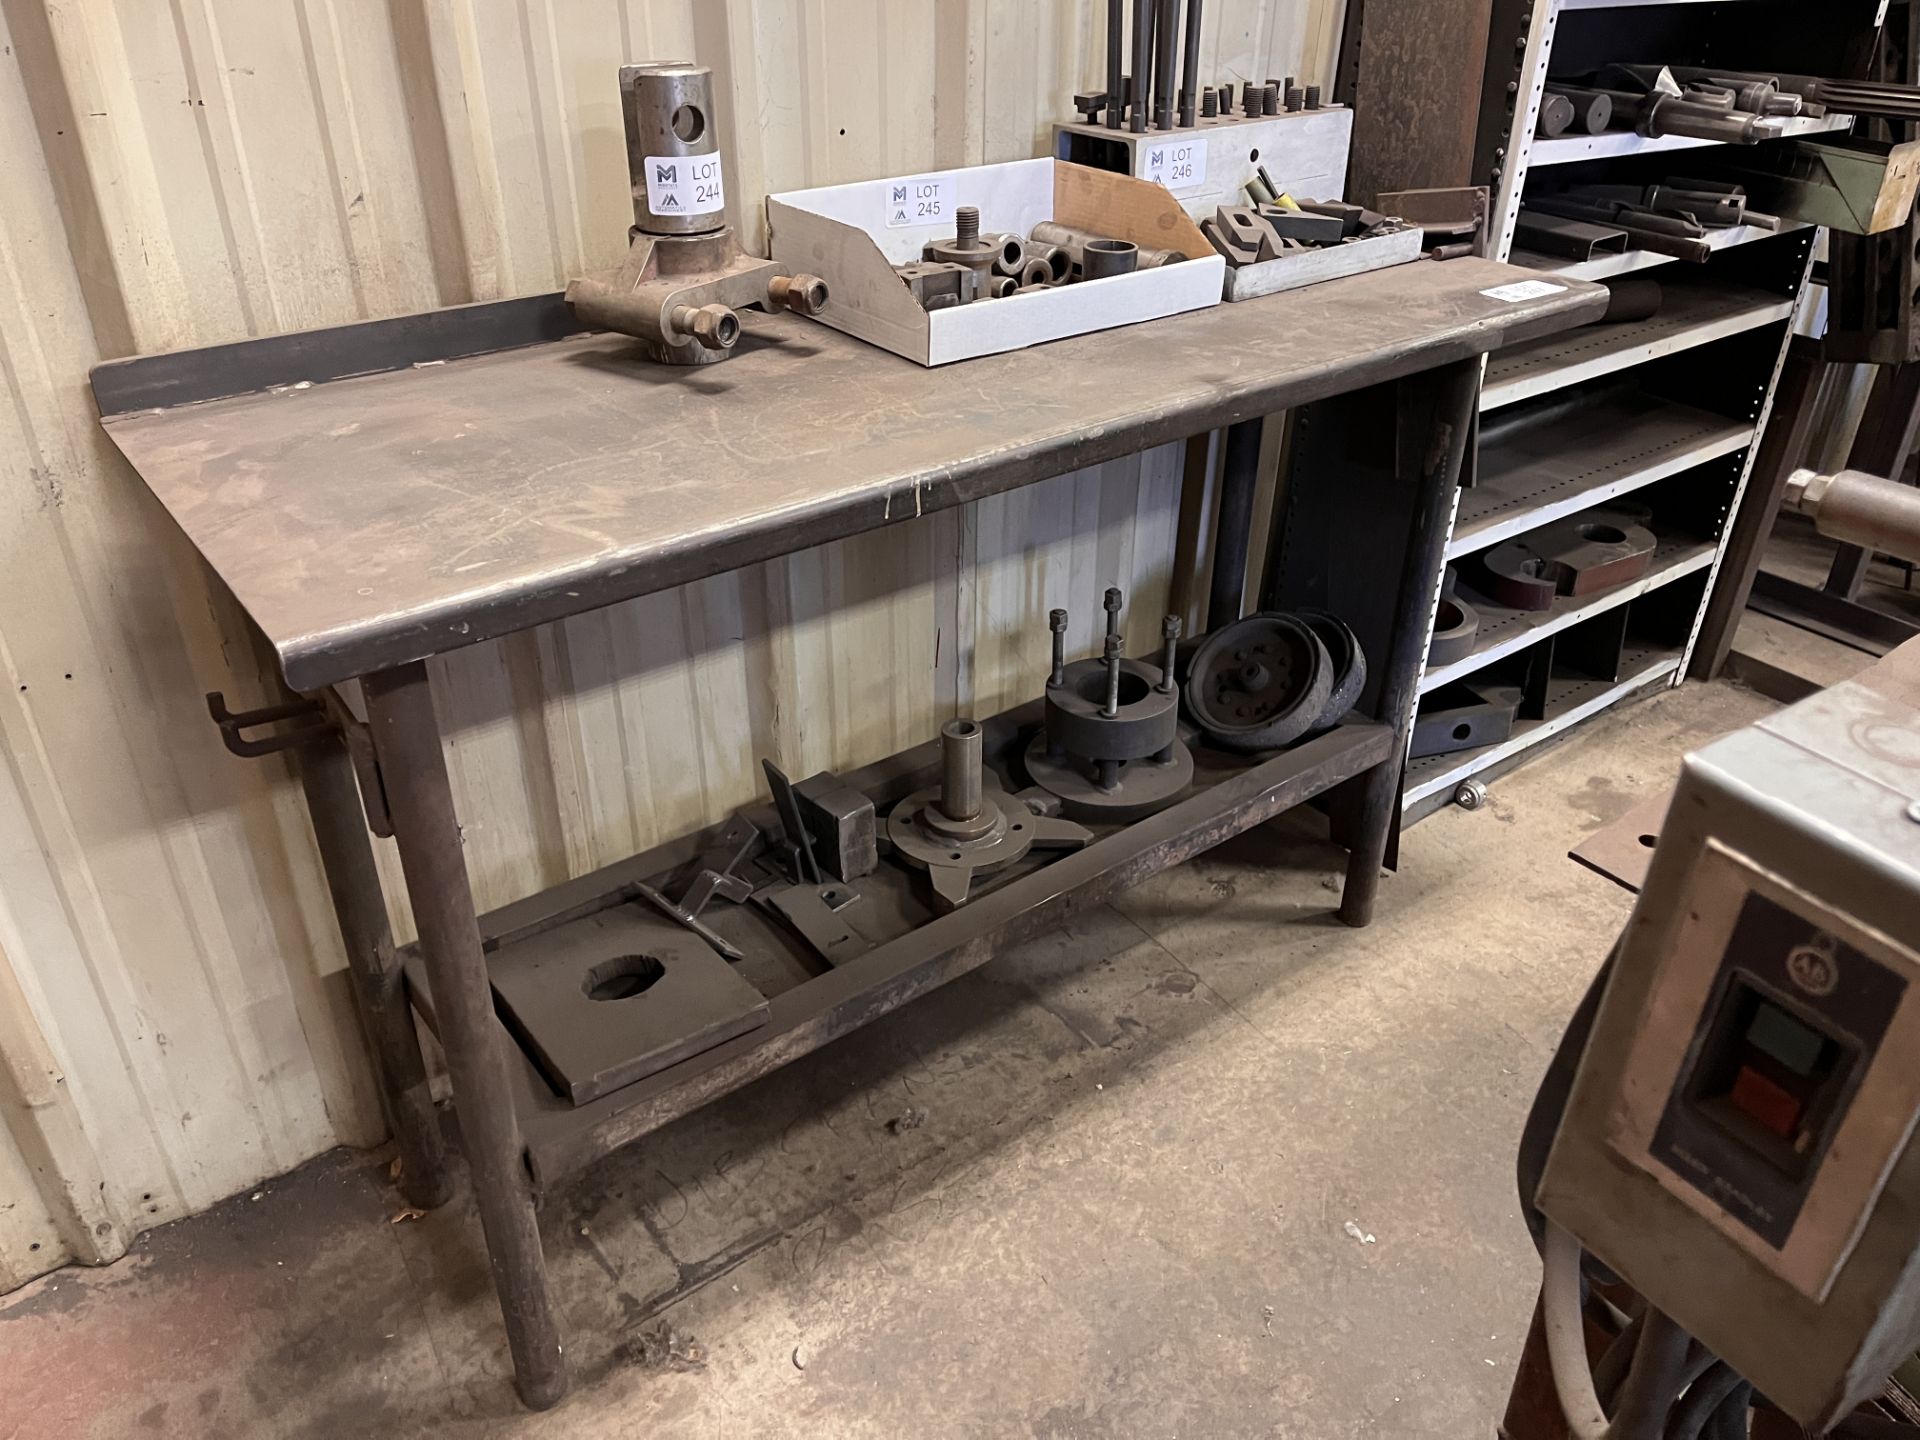 Metal Bench with items on bottom Shelf included